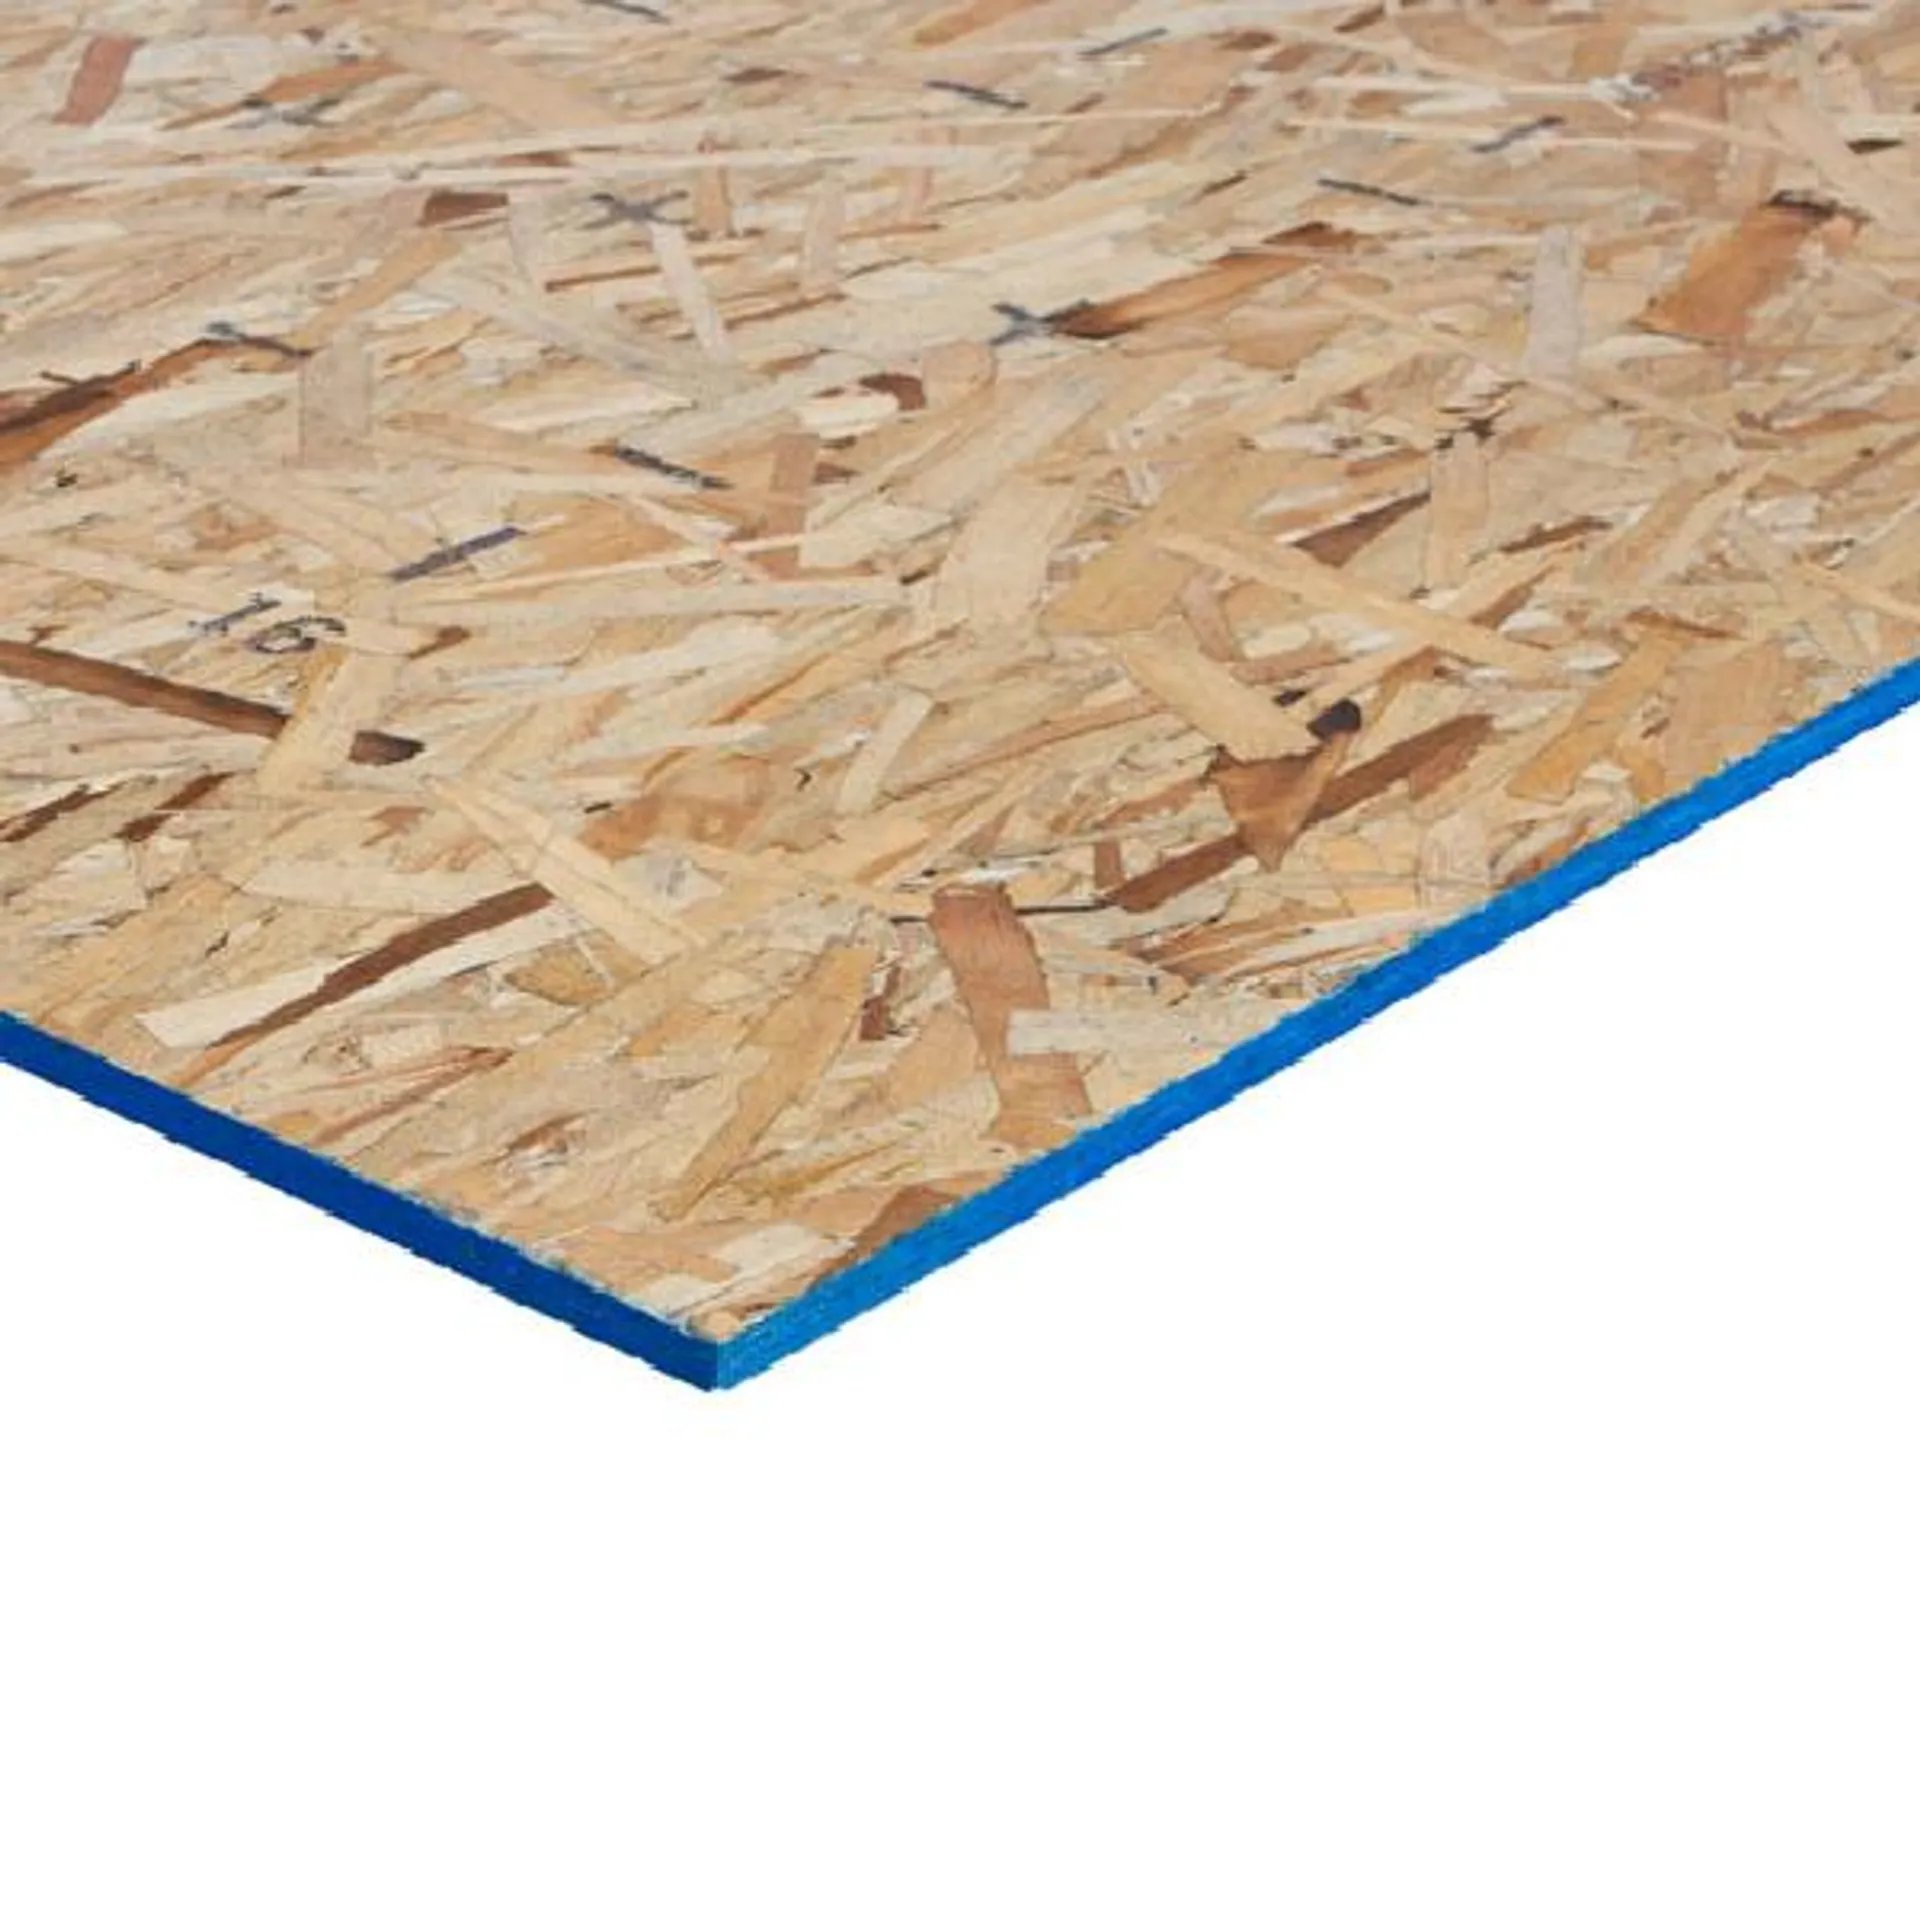 OSB/1 Oriented Strand Board (OSB), 15/32 in x 4 ft x 8 ft - Southern Pine, Straight Edge